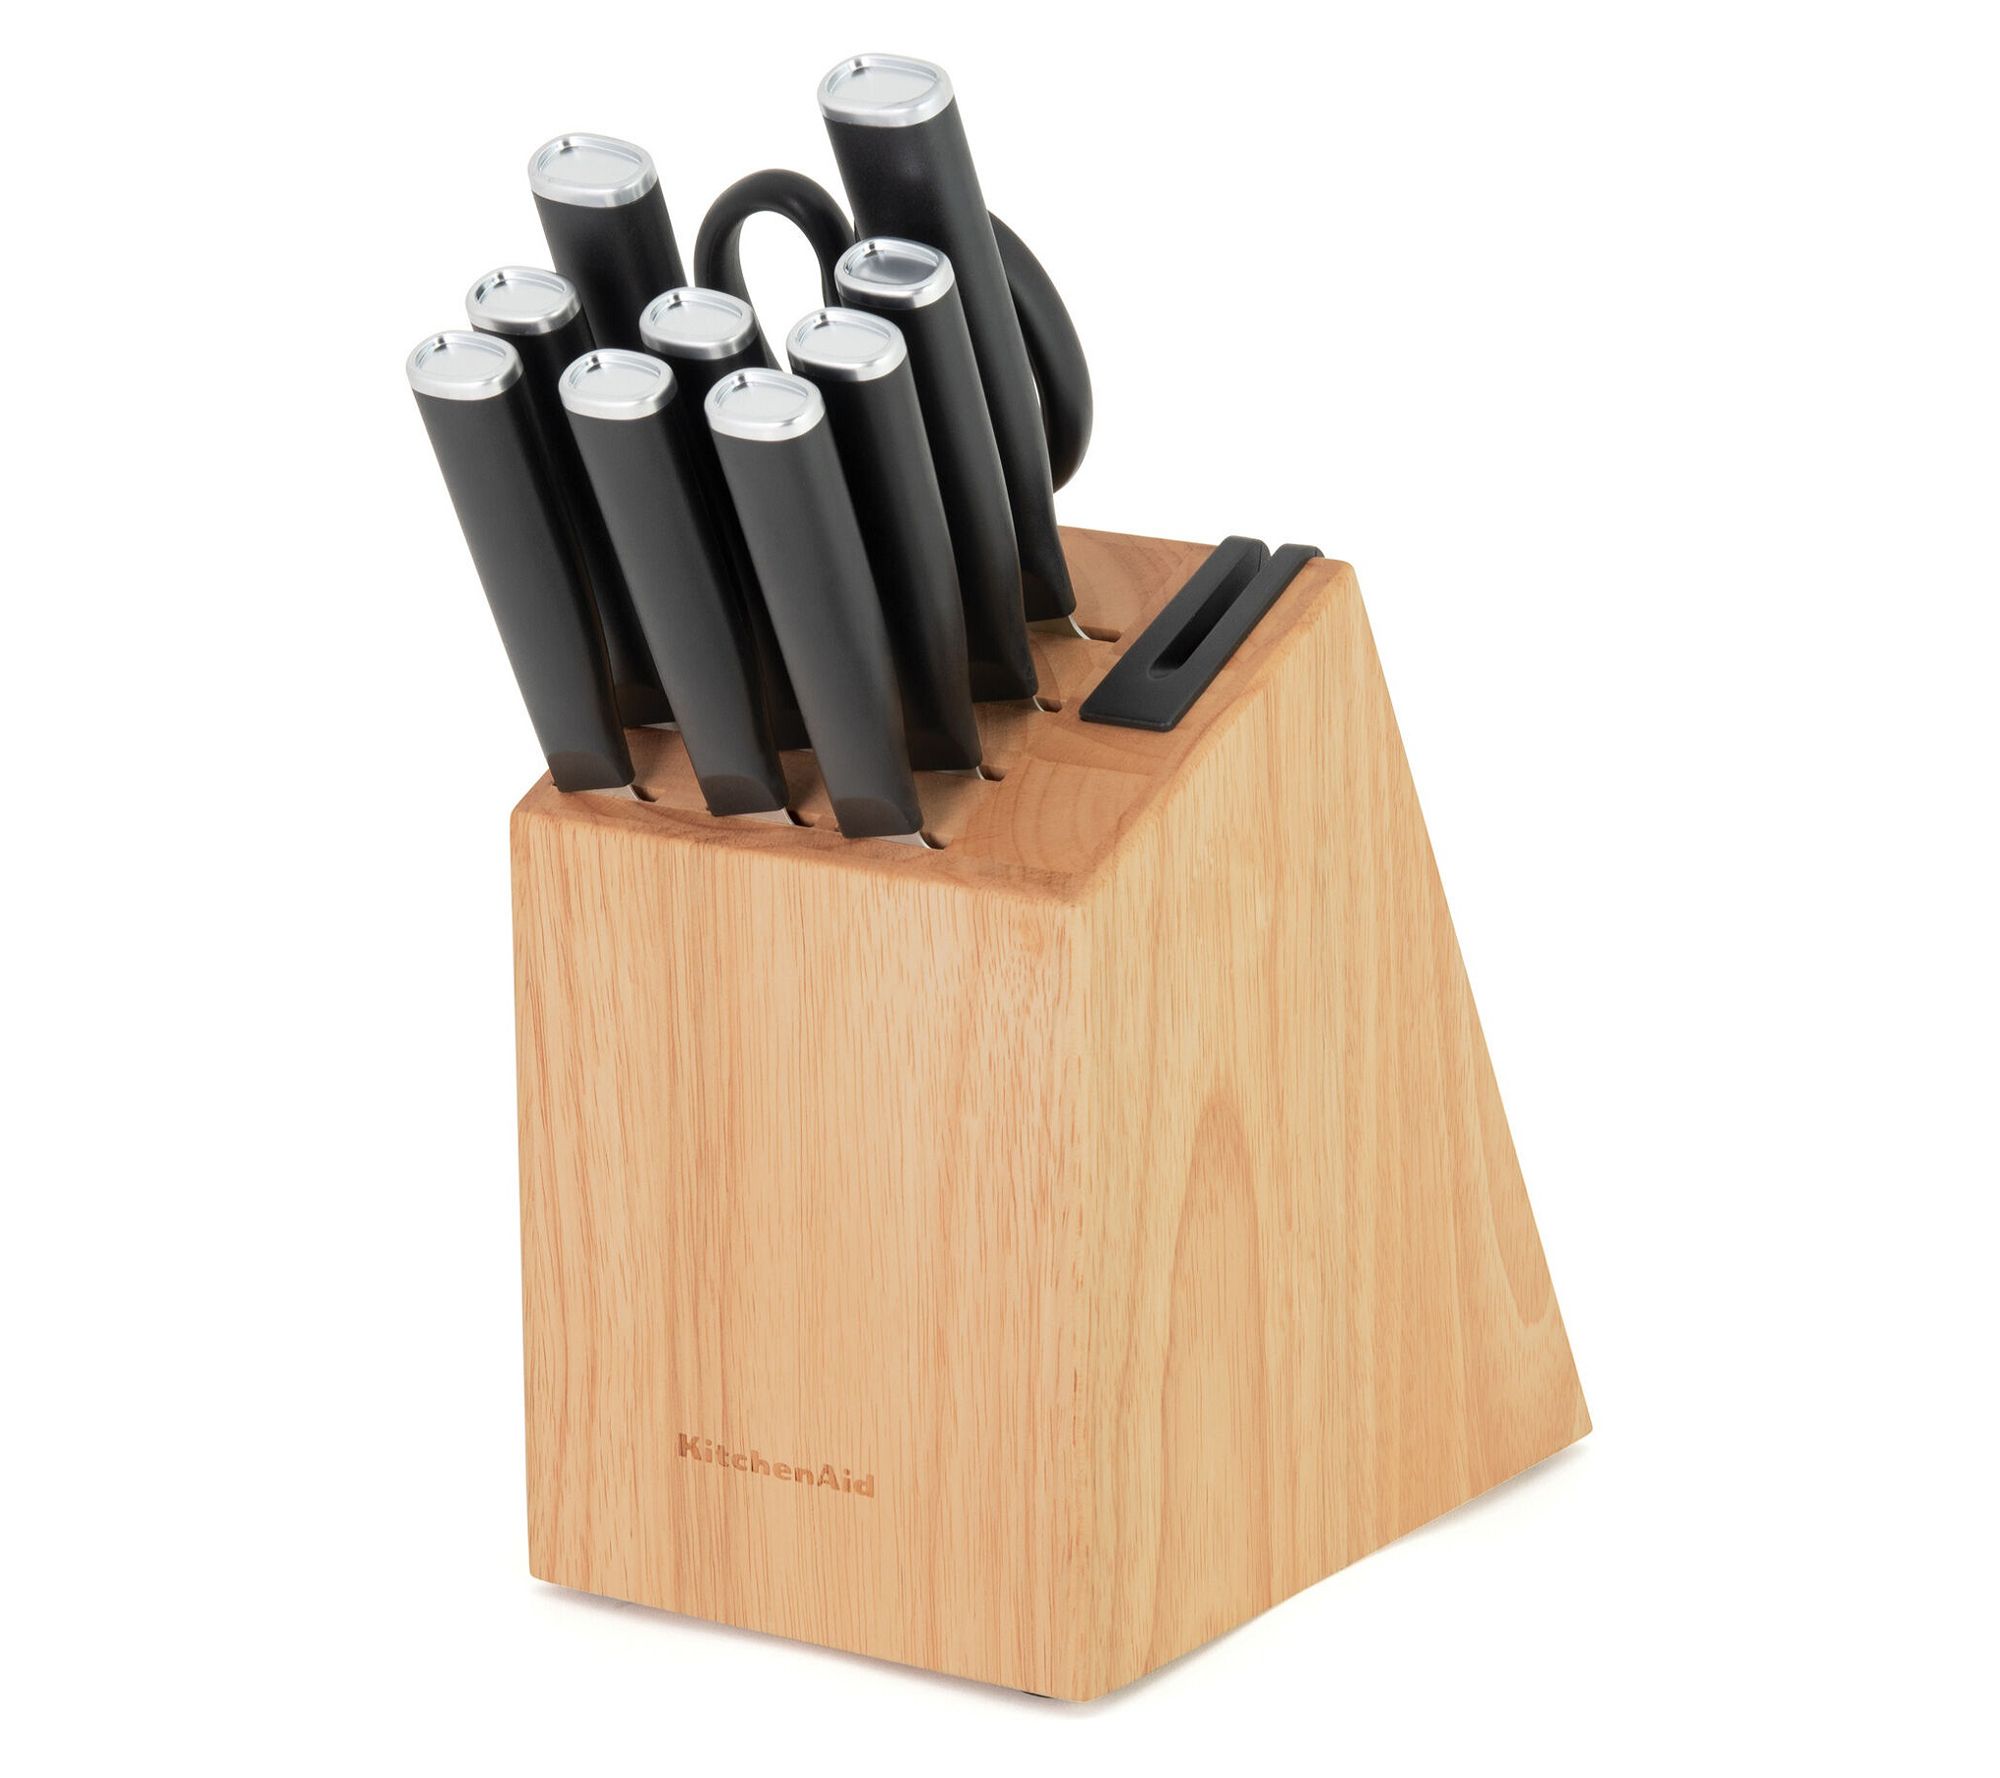 Cuisinart Classic Collection 12-Piece Knife Block Set Stainless Steel NEW